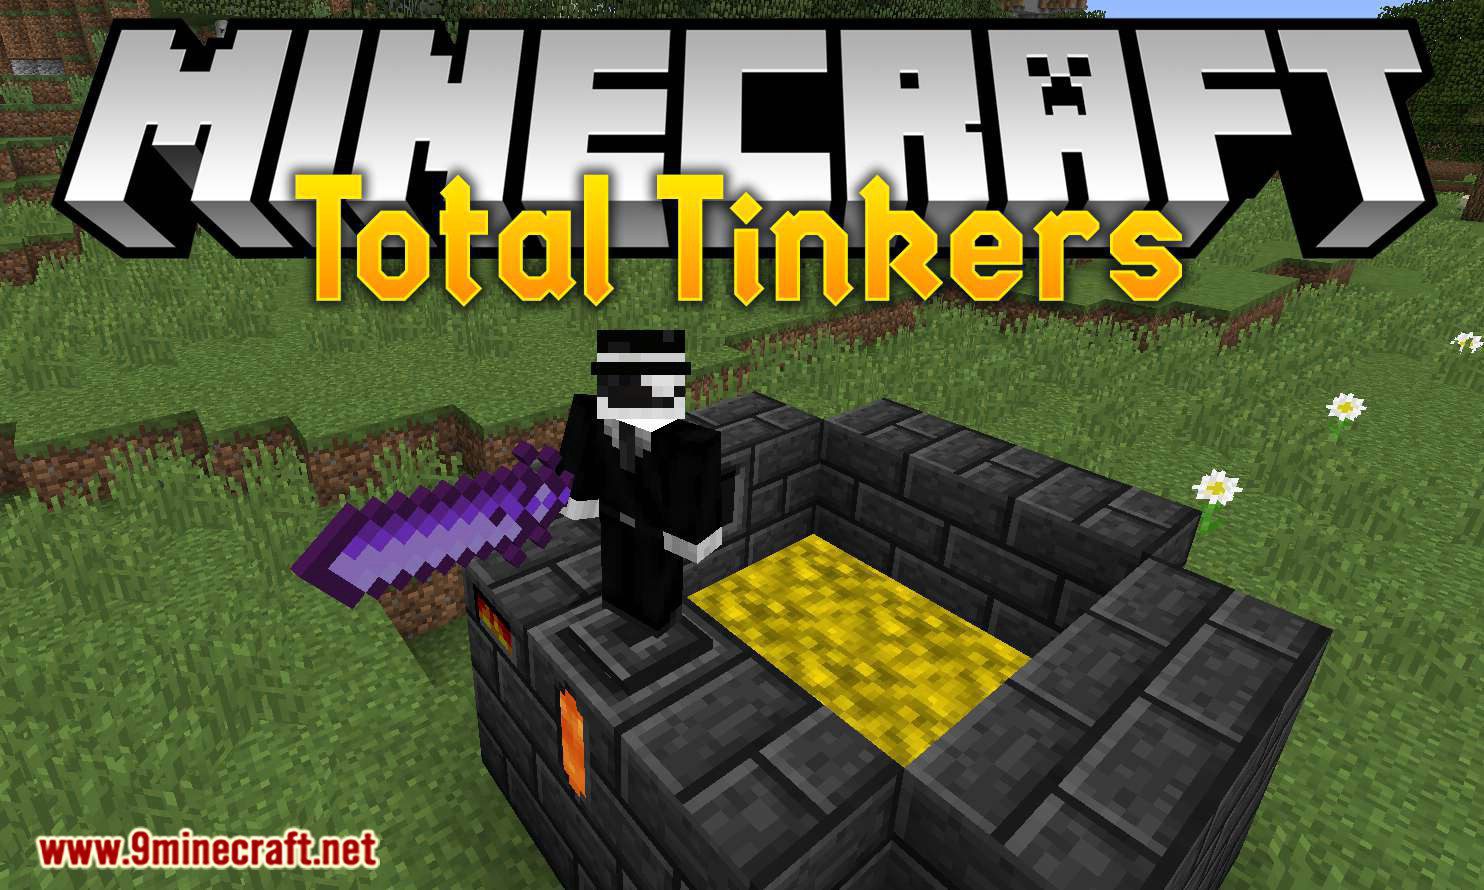 total-tinkers-mod-1-12-2-weapons-addon-mod-for-tinkers-construct-mc-mod-net